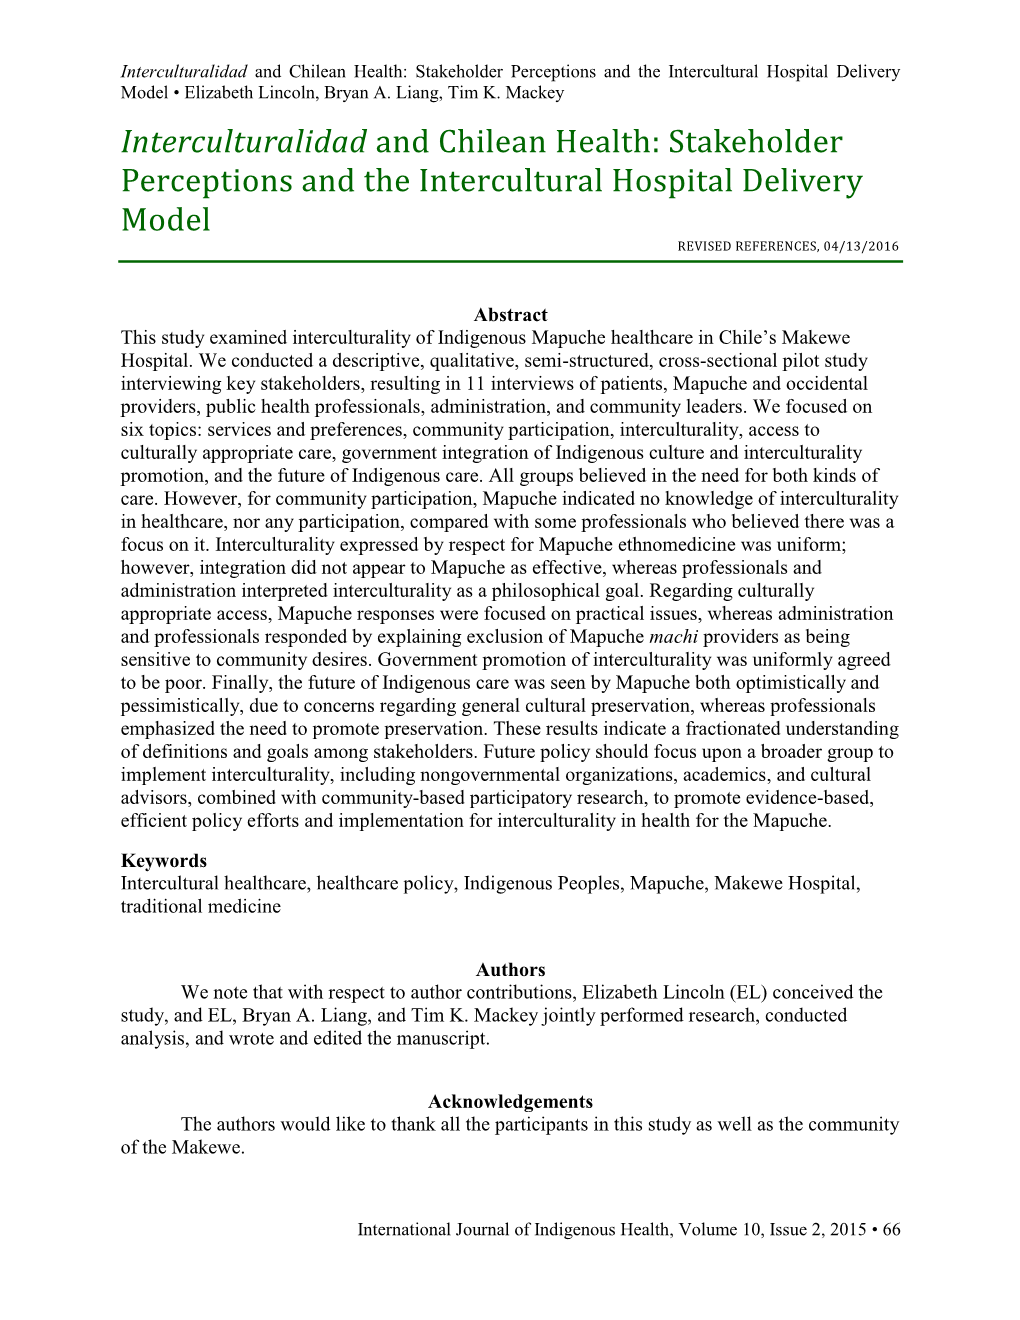 Interculturalidad and Chilean Health: Stakeholder Perceptions and the Intercultural Hospital Delivery Model • Elizabeth Lincoln, Bryan A